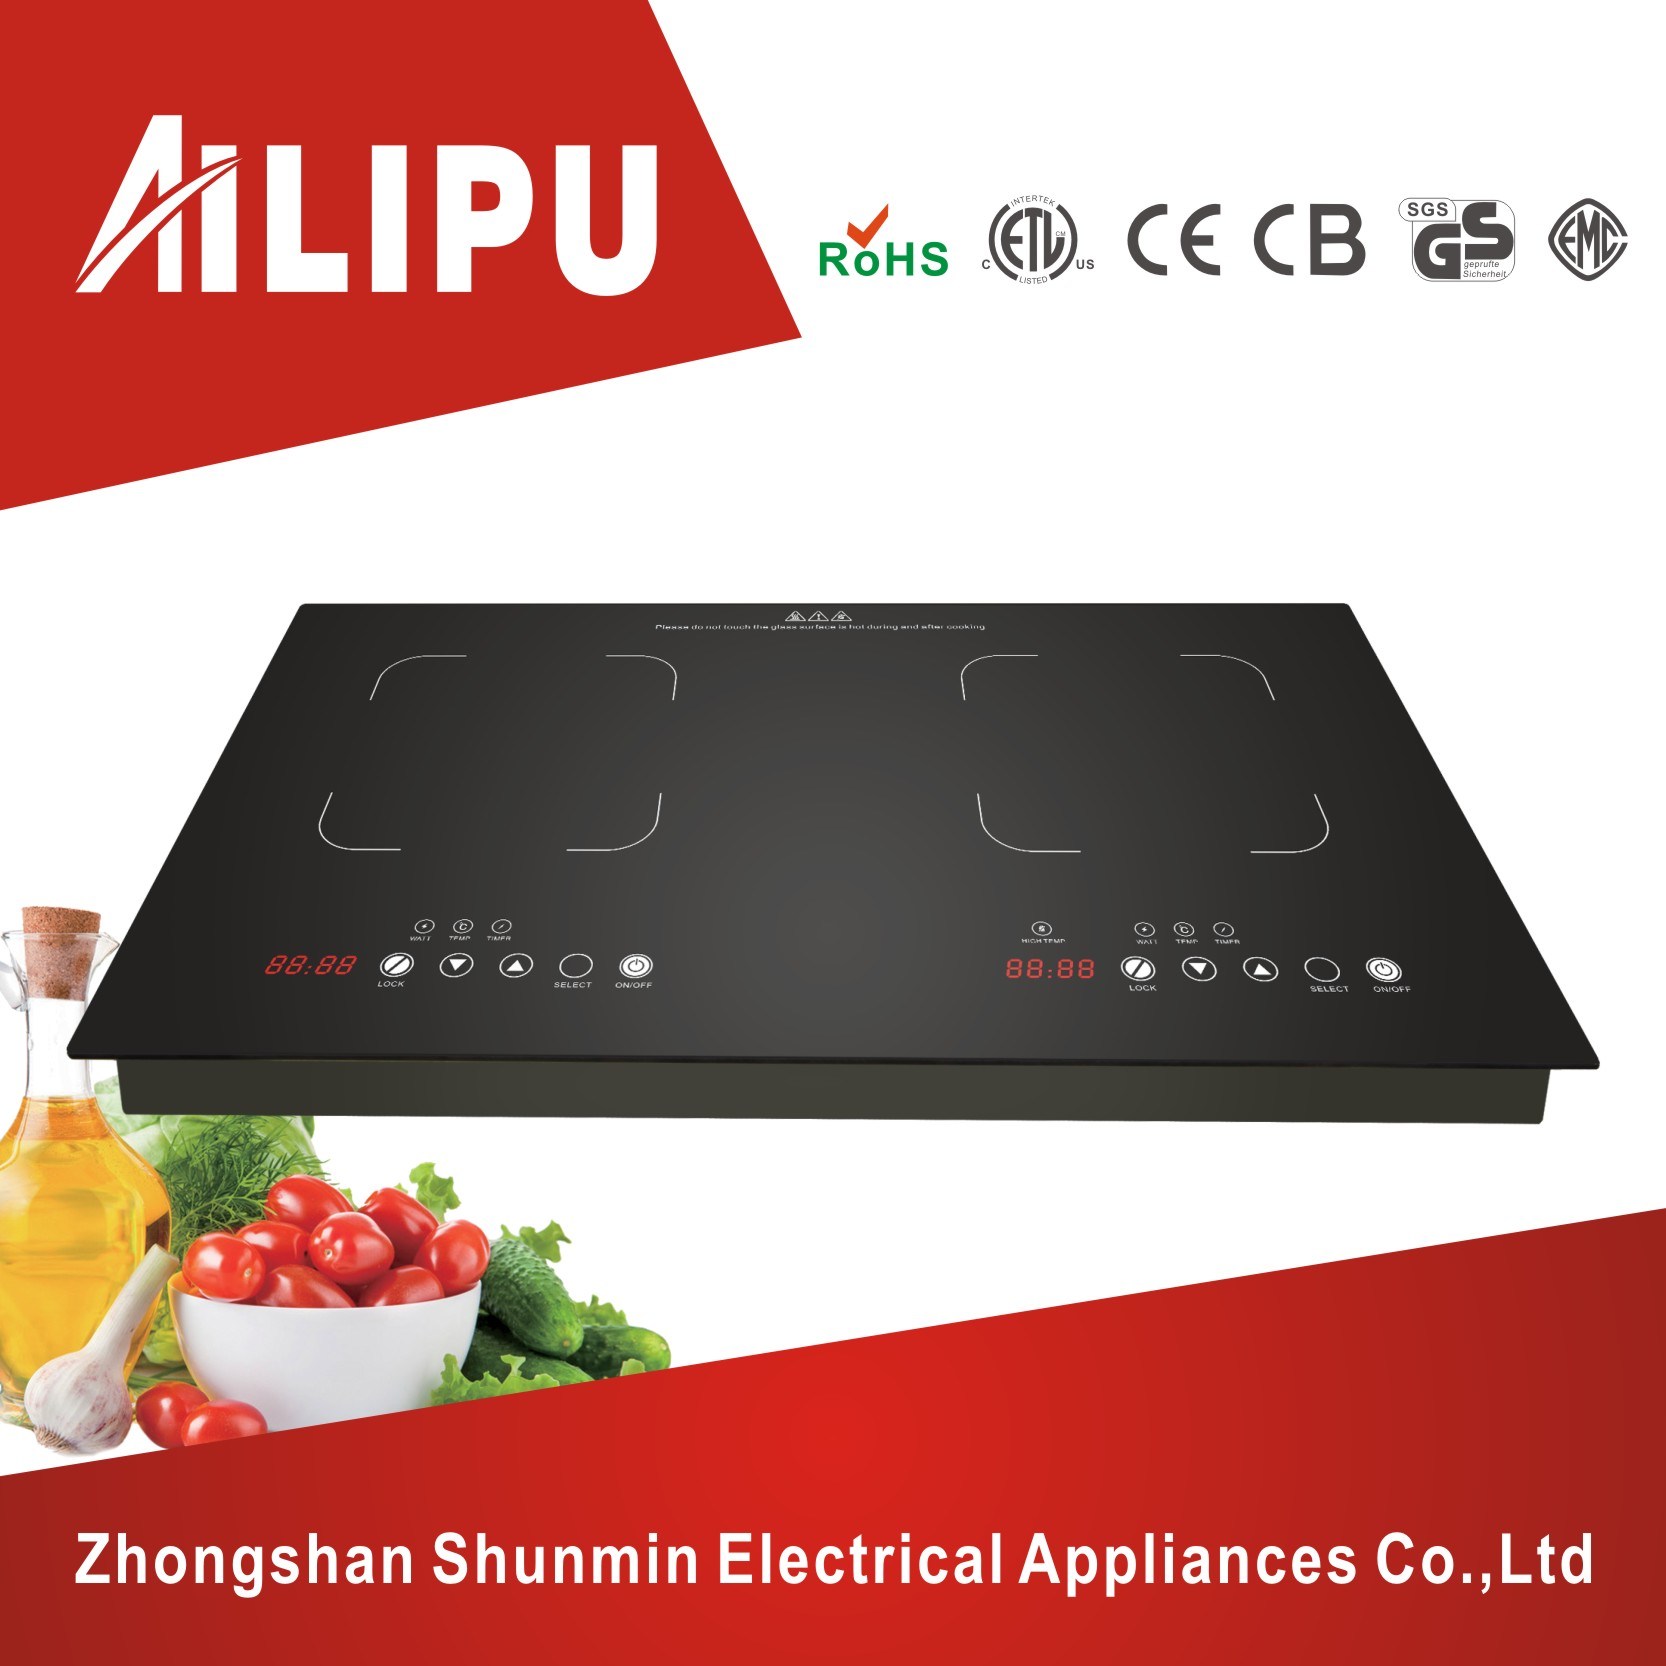 Metal Husing Built-in 2 Burners Induction Cooktop, 2 in 1 Induction Cooker